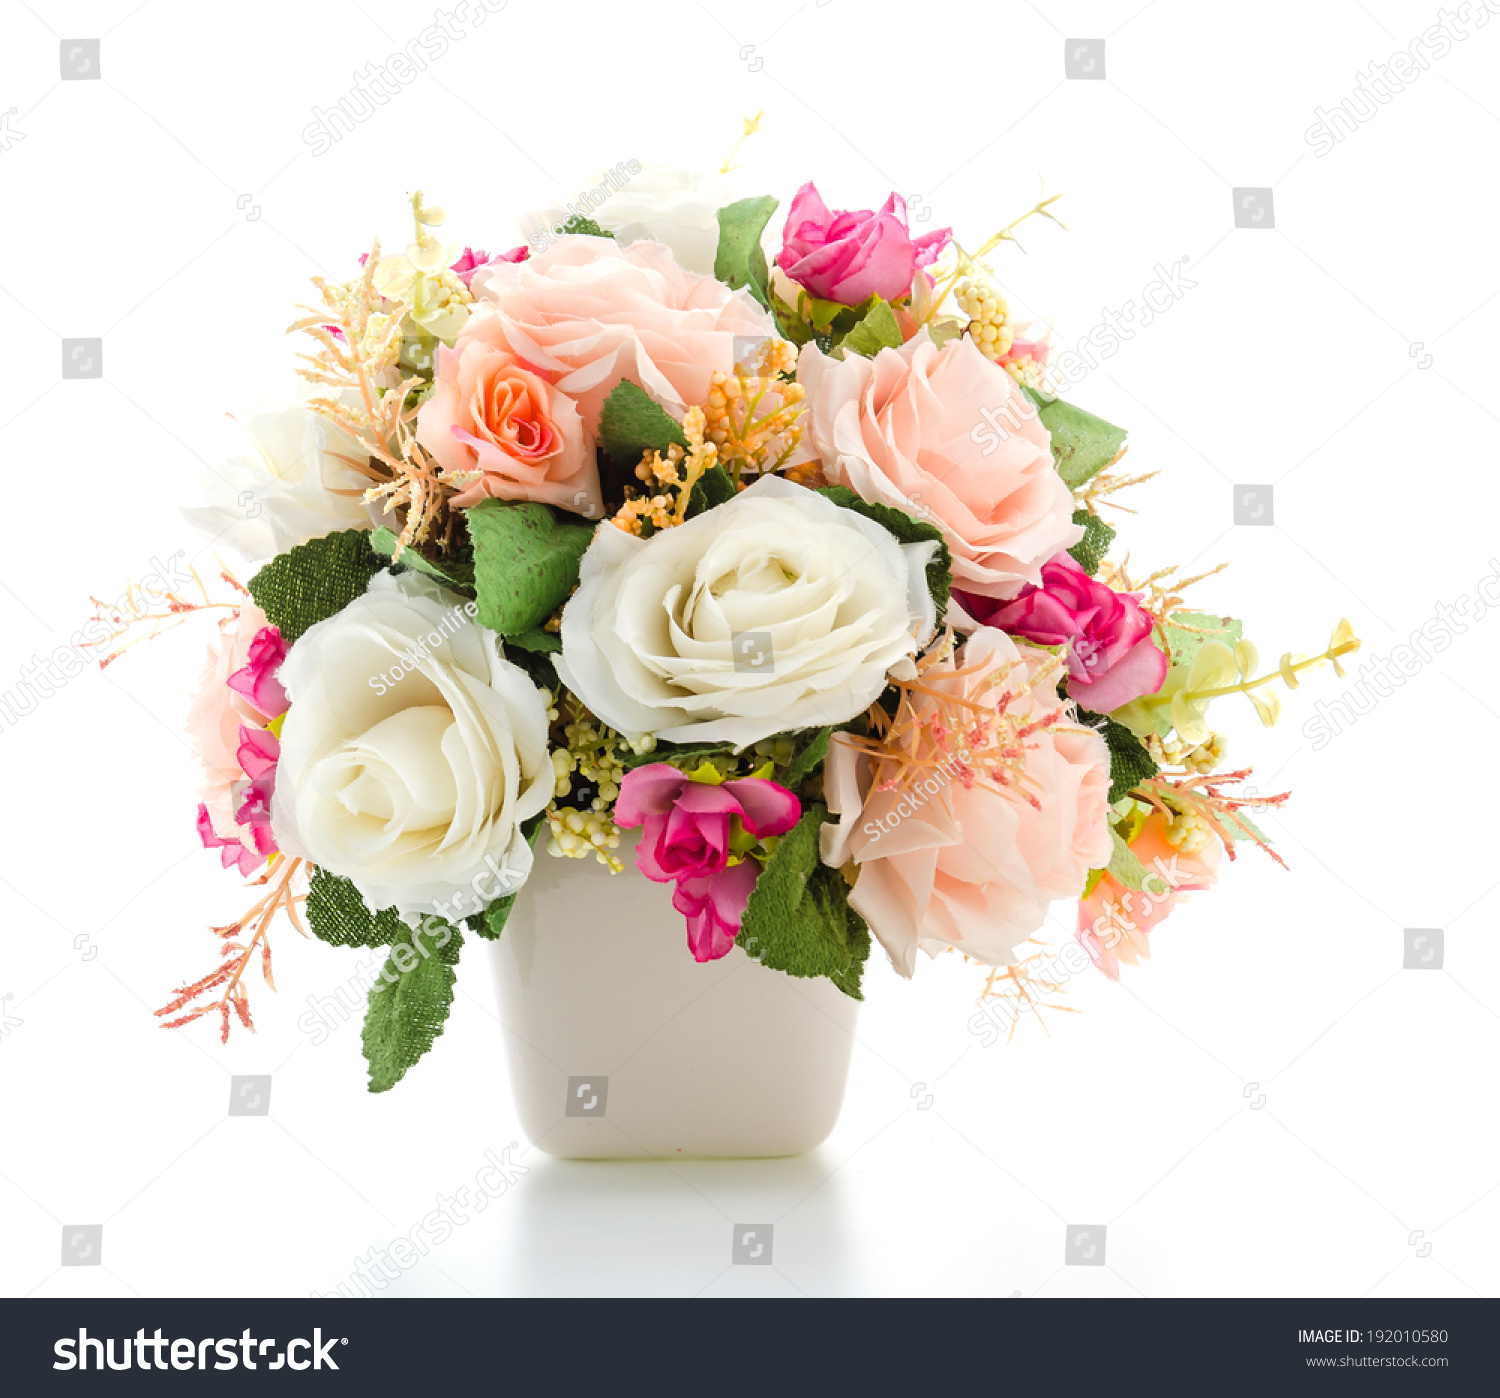 Bouquet flowers isolated on white #192010580